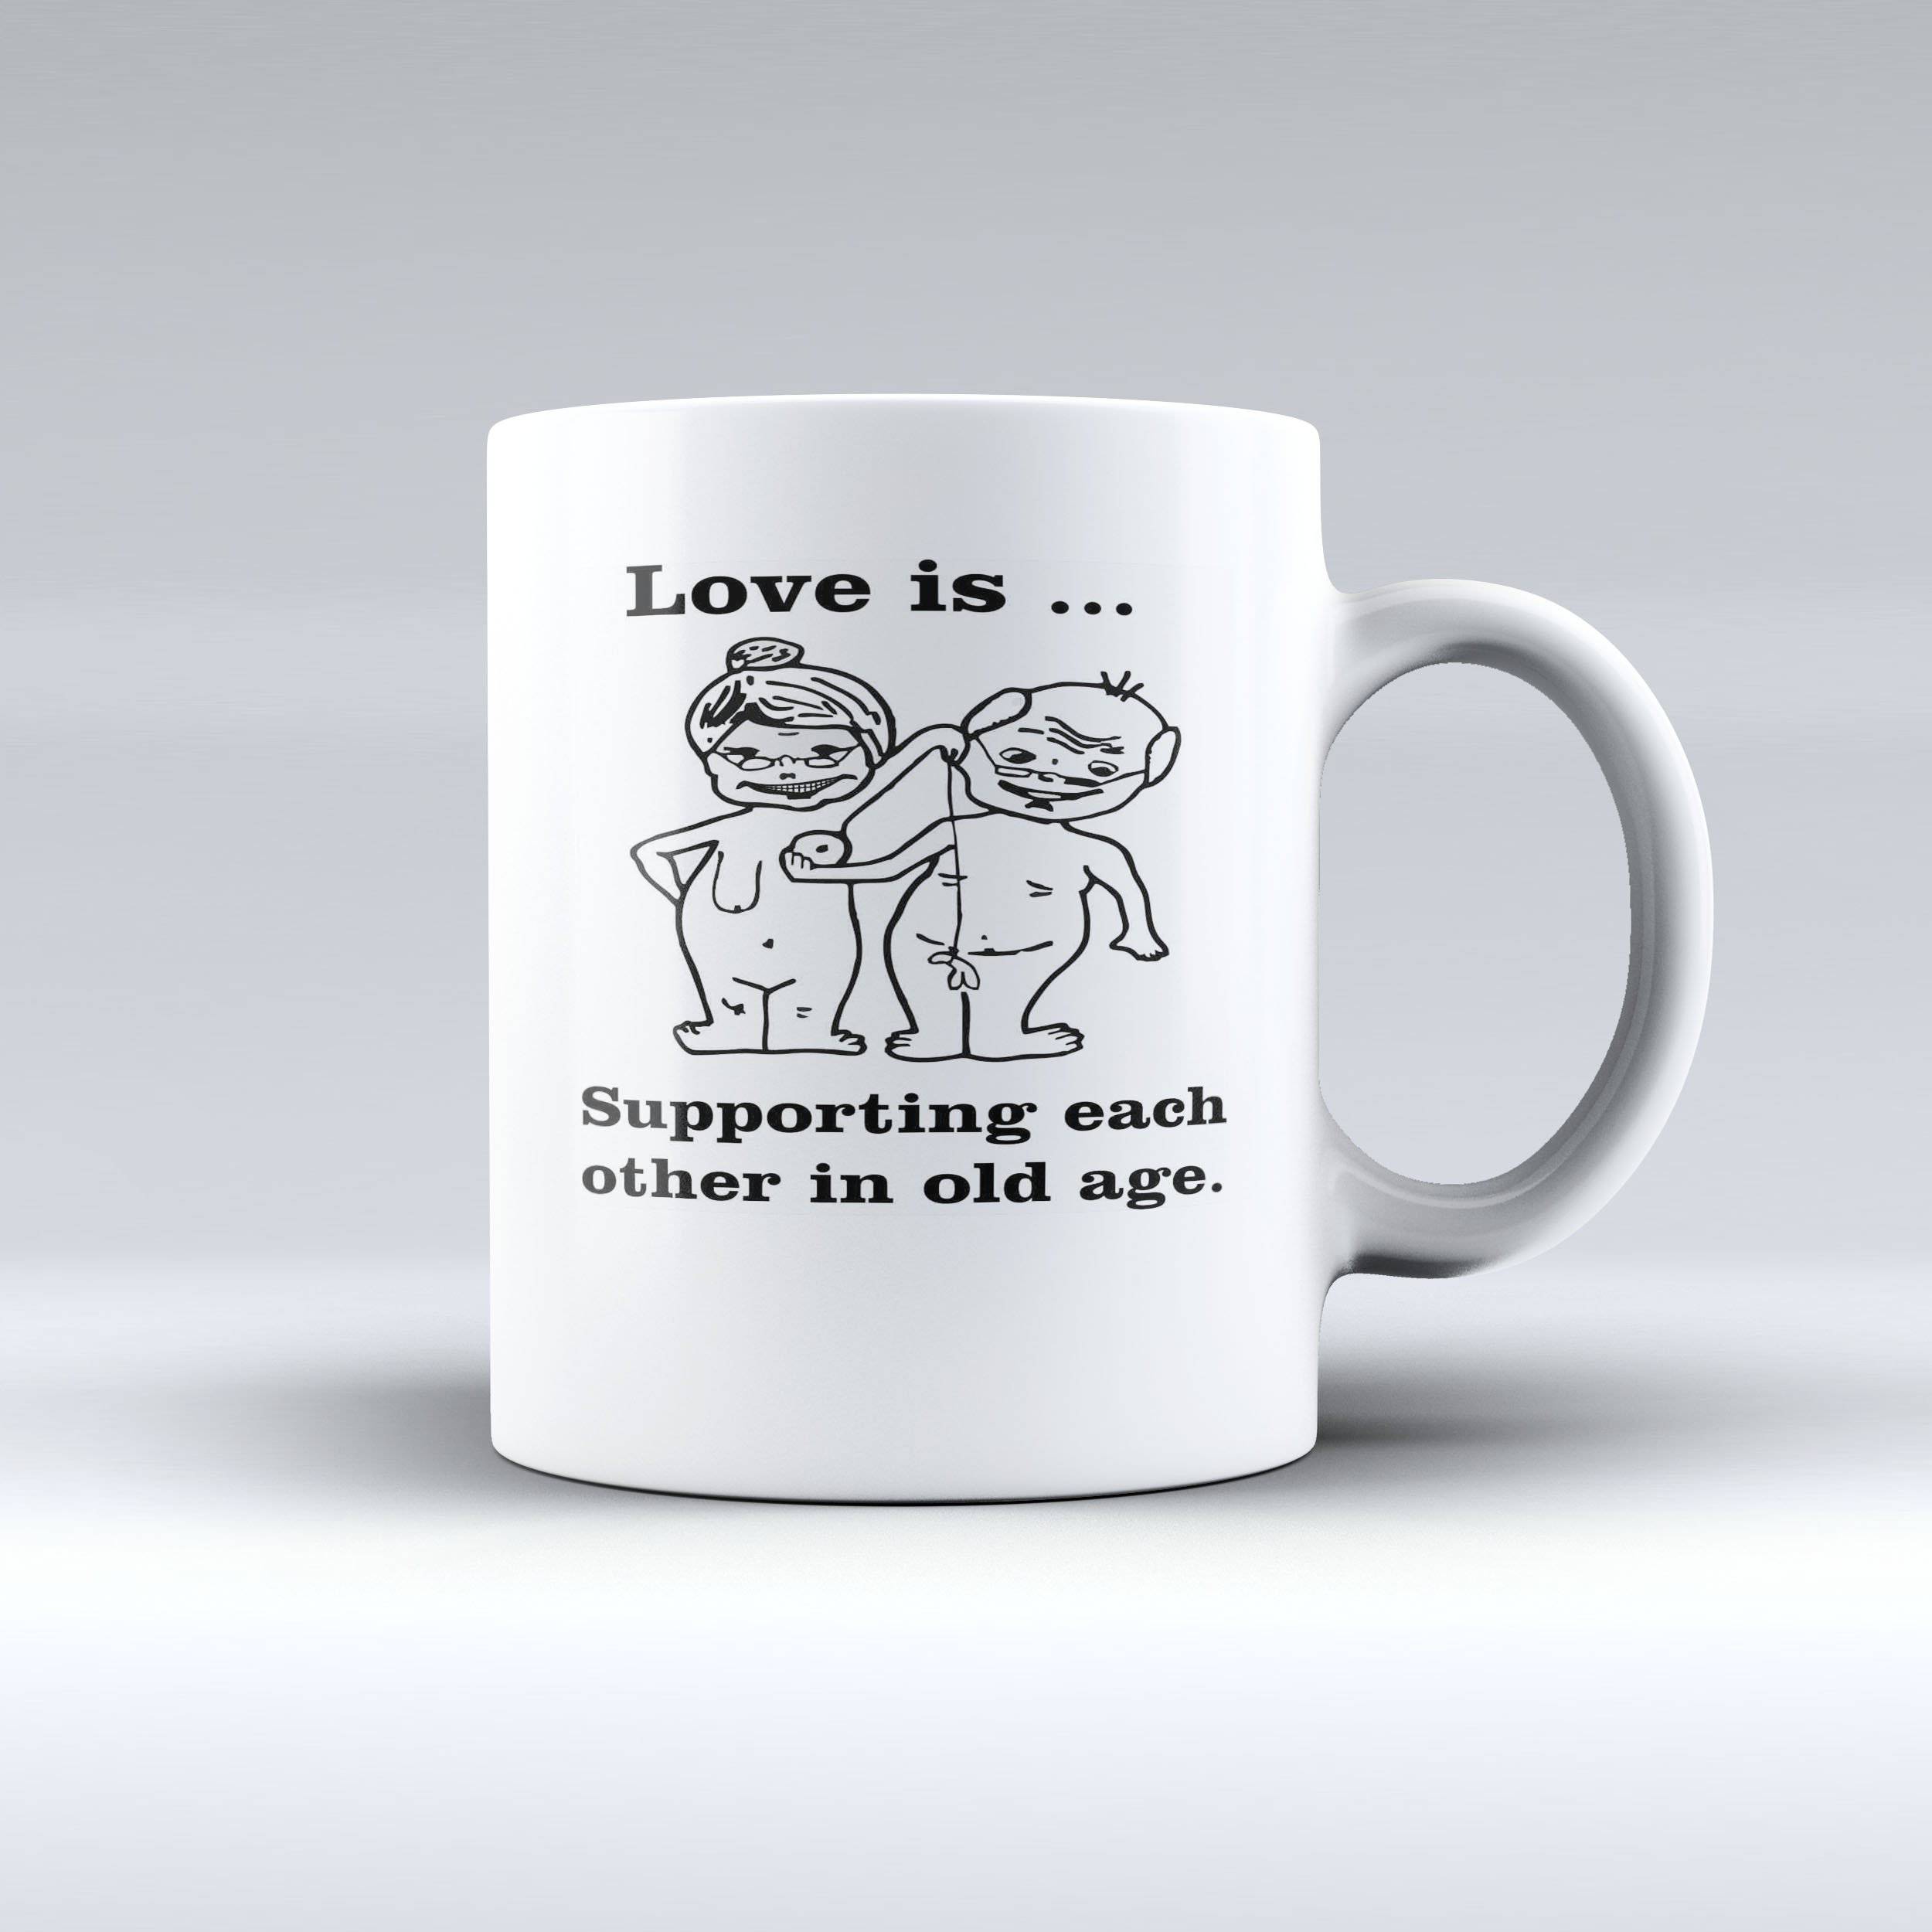 Love is supporting each other in old age - Cute Coffee Mug - 150tees.com - 150 TEES GIFTS & MORE